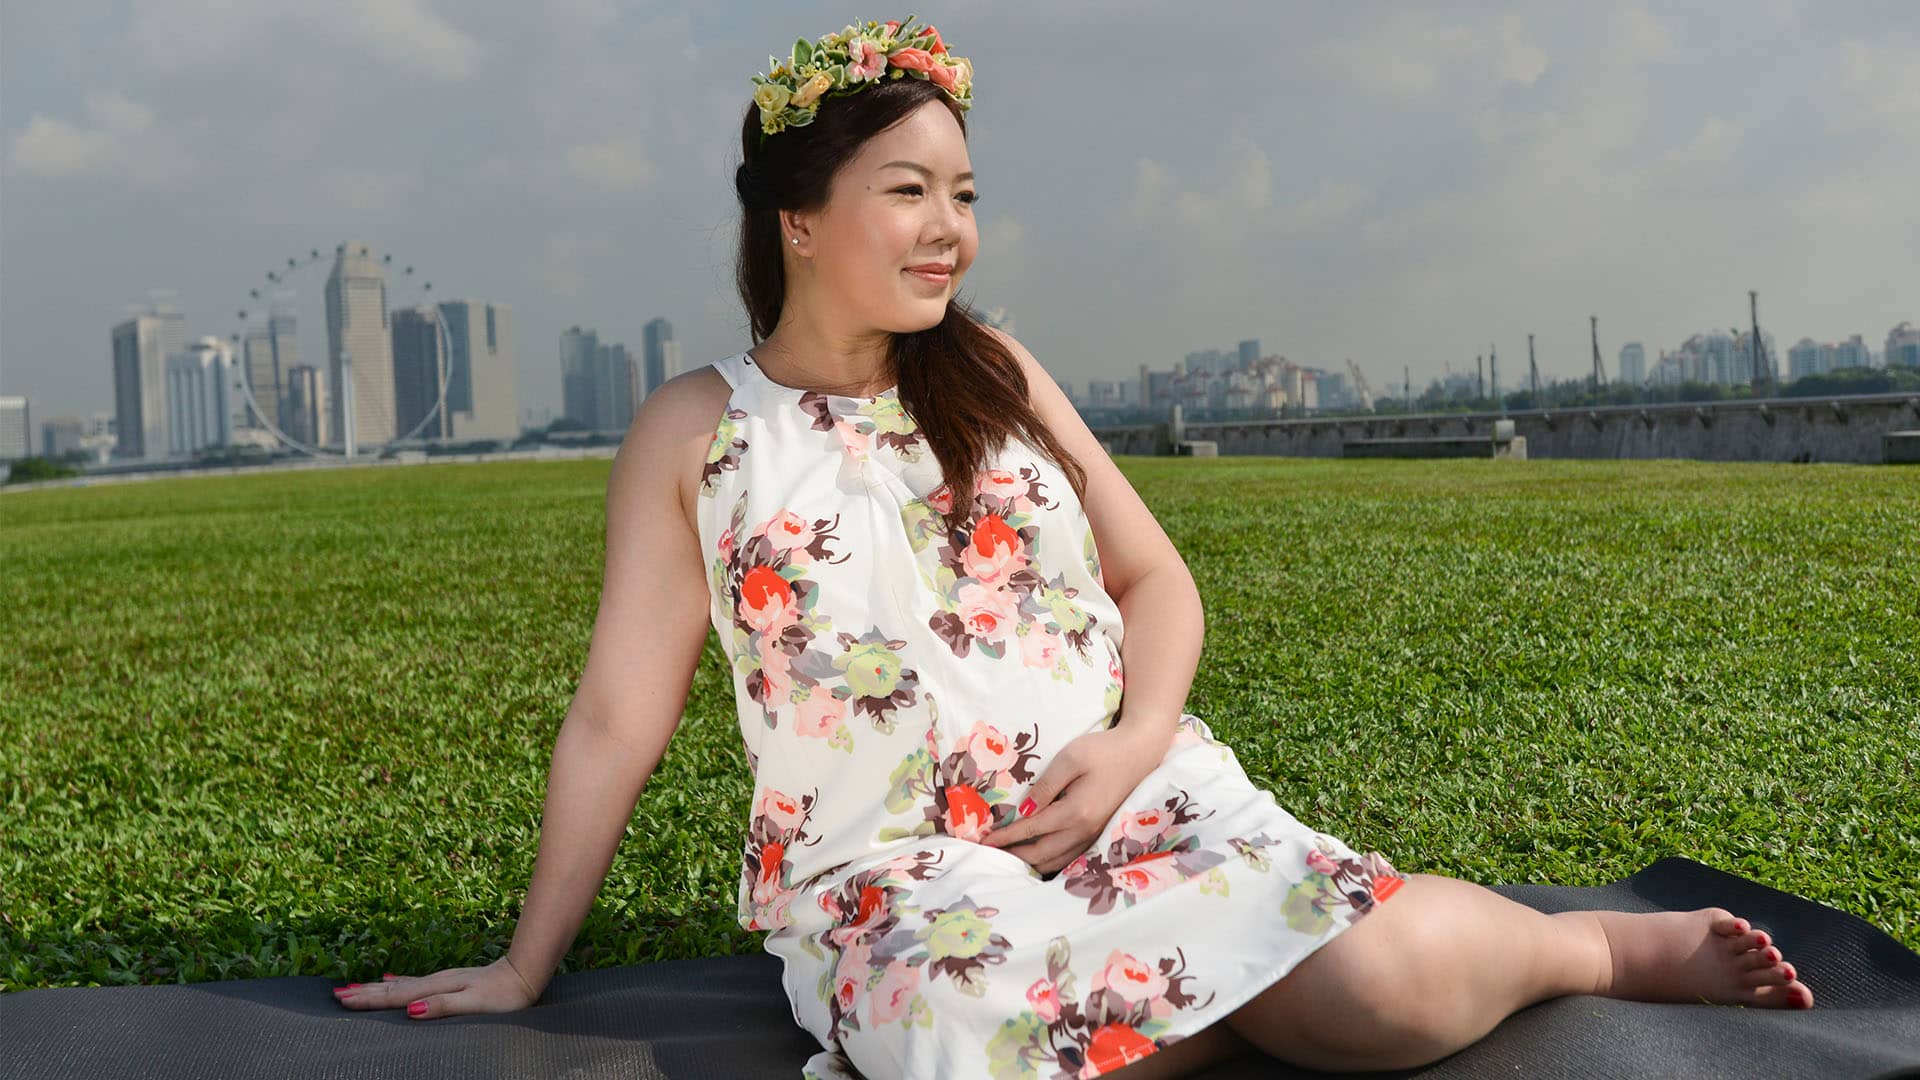 What Do You Do if You Are a Woman Expecting a Baby in Singapore